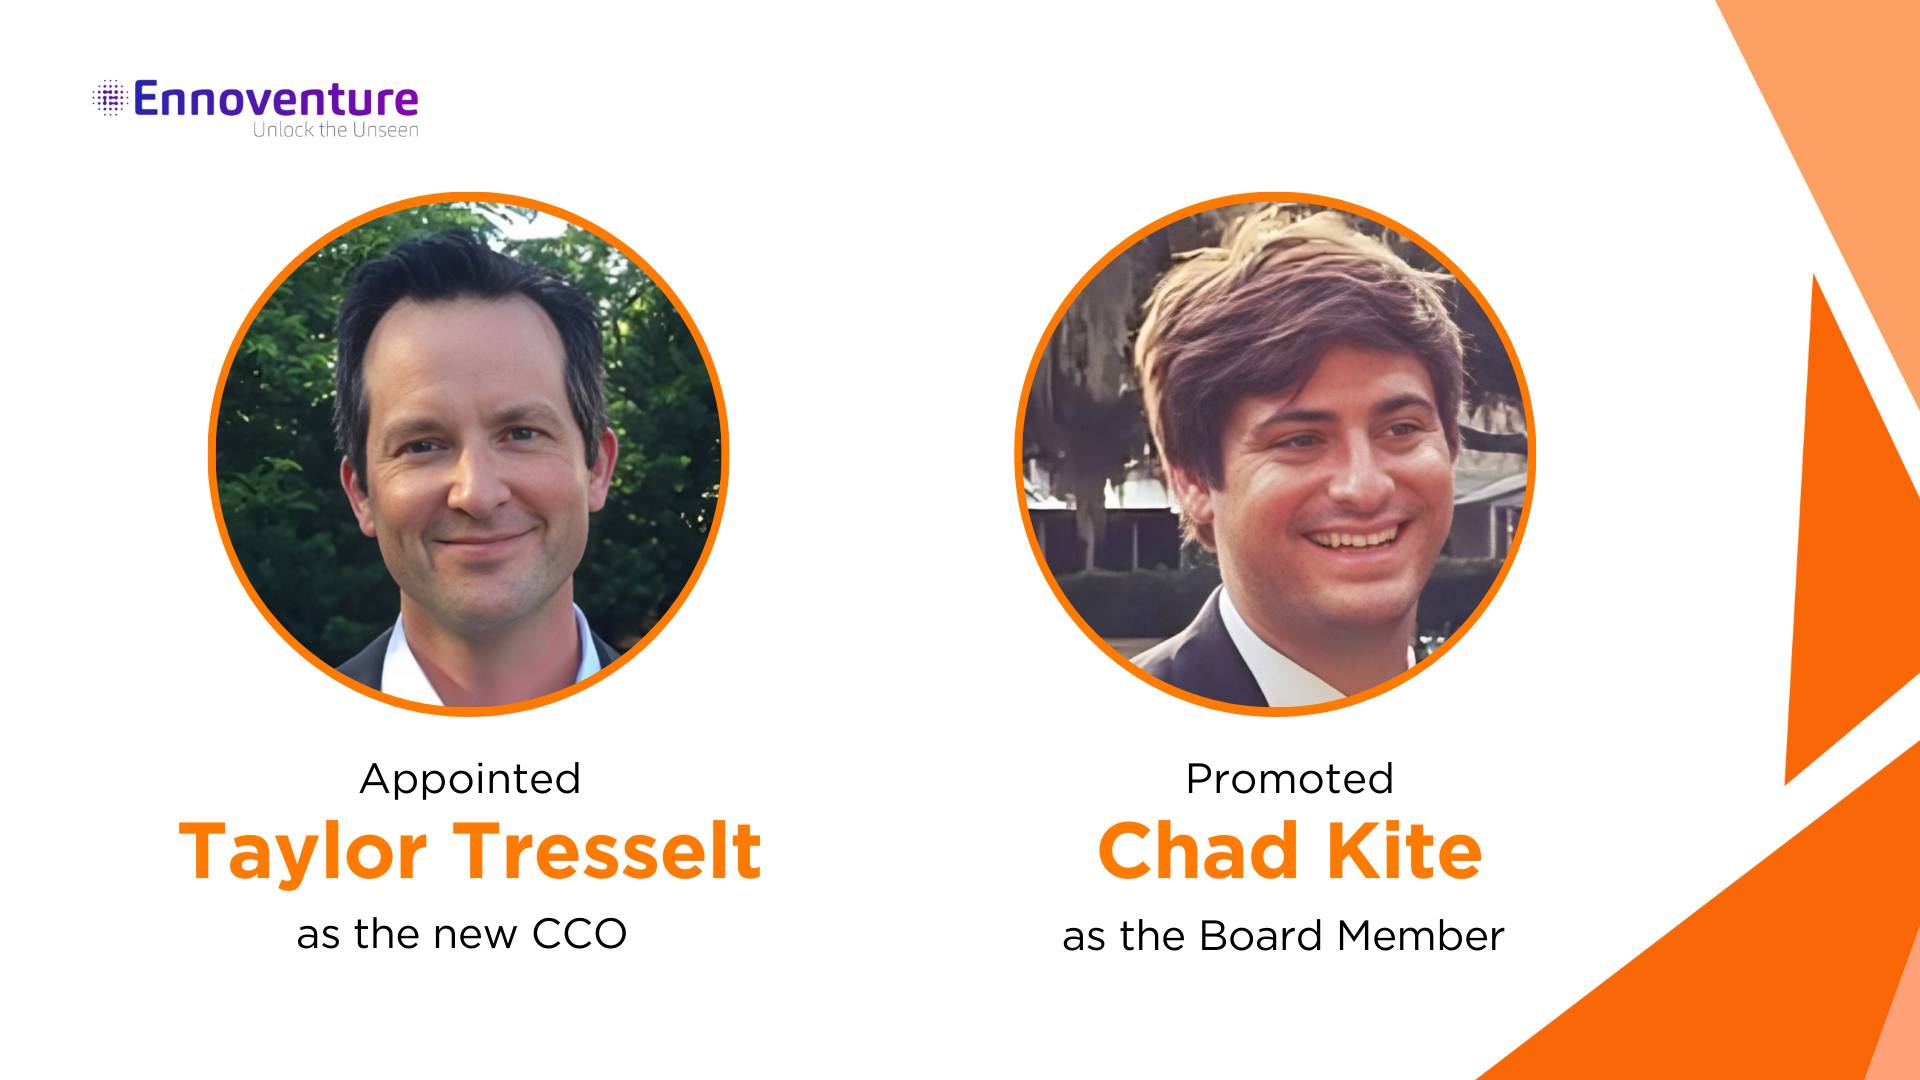 Ennoventure Inc. Appoints Taylor Tresselt as CCO and Promotes Chad Kite to Board